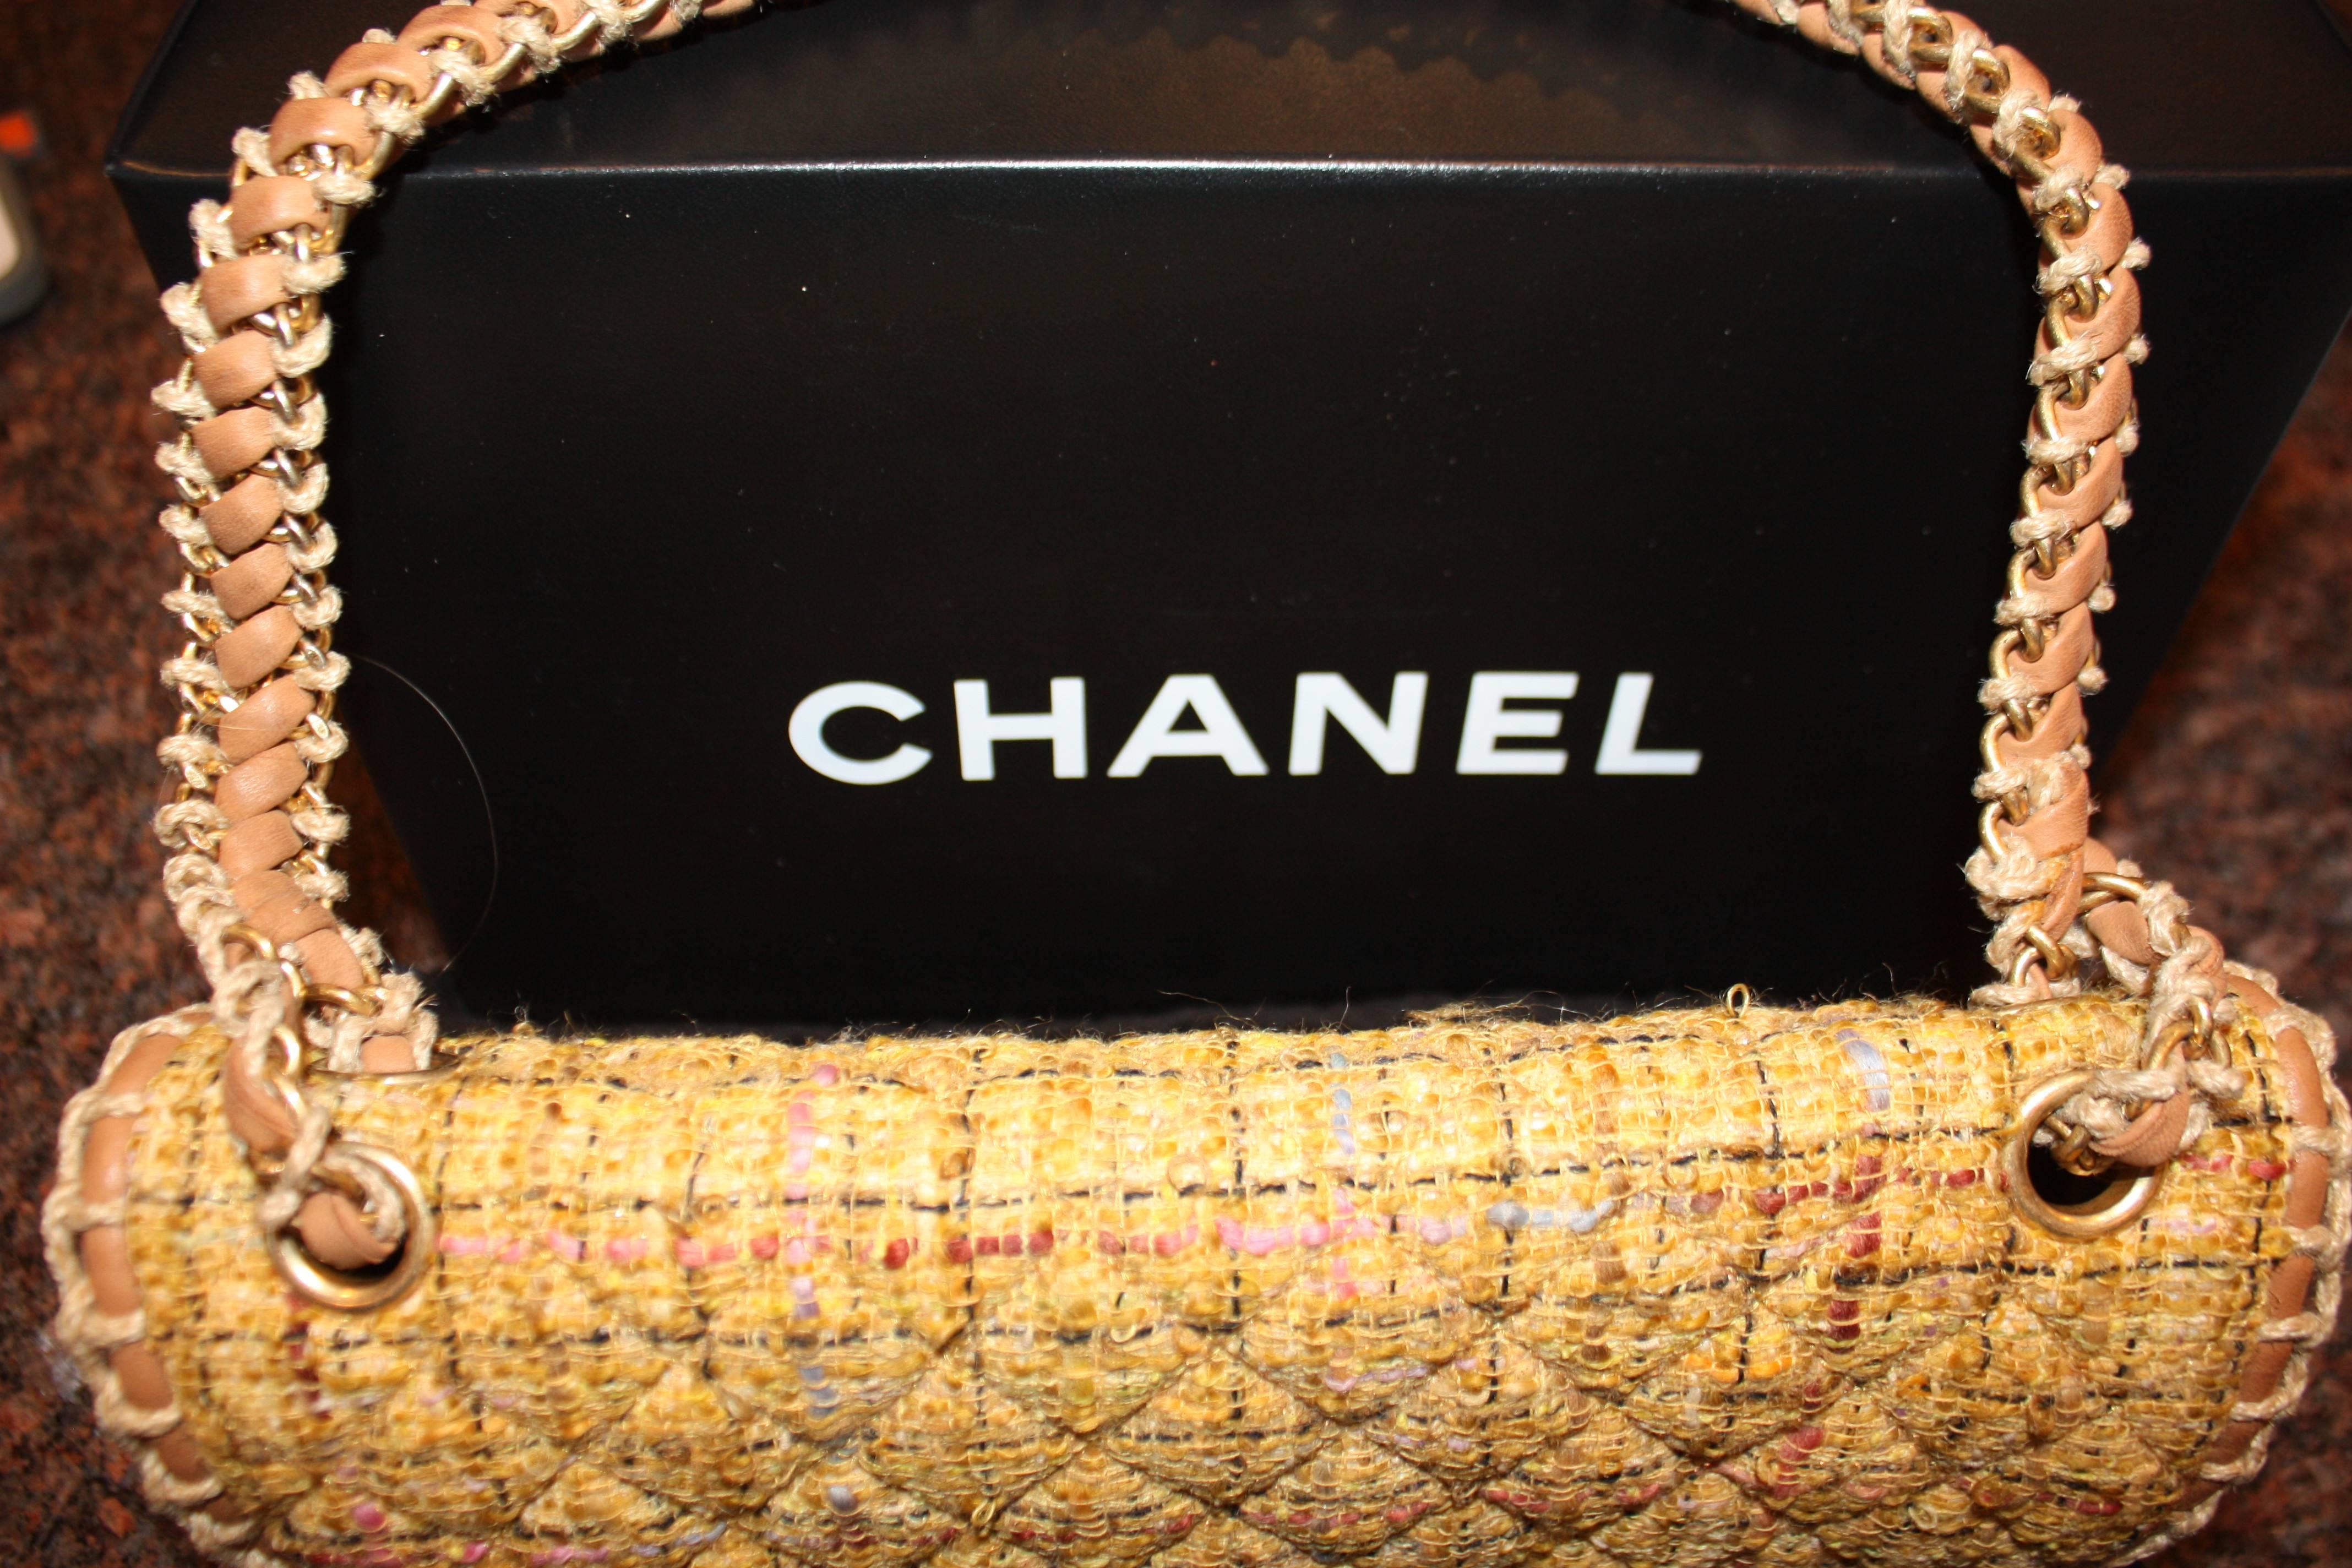 Mustard and multicolor Chanel bag from recent collection.  Gold hardware, beige leather trim and lining.  Woven chain link shoulder strap, single pocket at back.  Pristine condition
16